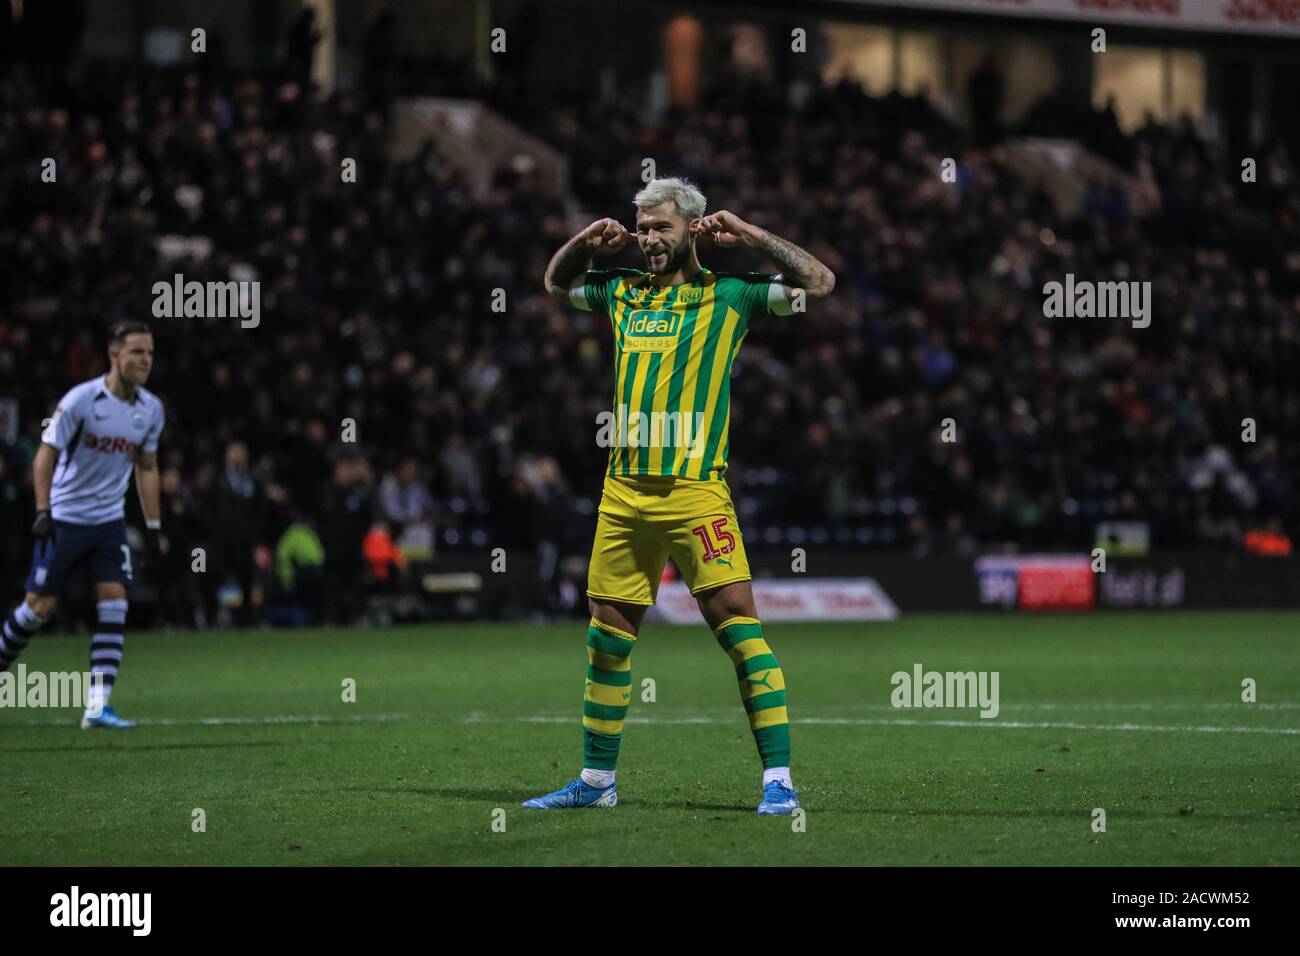 2nd December 2019, Deepdale, Preston, England; Sky Bet Championship, Preston North End v West Bromwich Albion : Charlie Austin (15) of West Bromwich Albion  celebrates scoring a penalty to make it 0-1 Credit: Mark Cosgrove/News Images Stock Photo